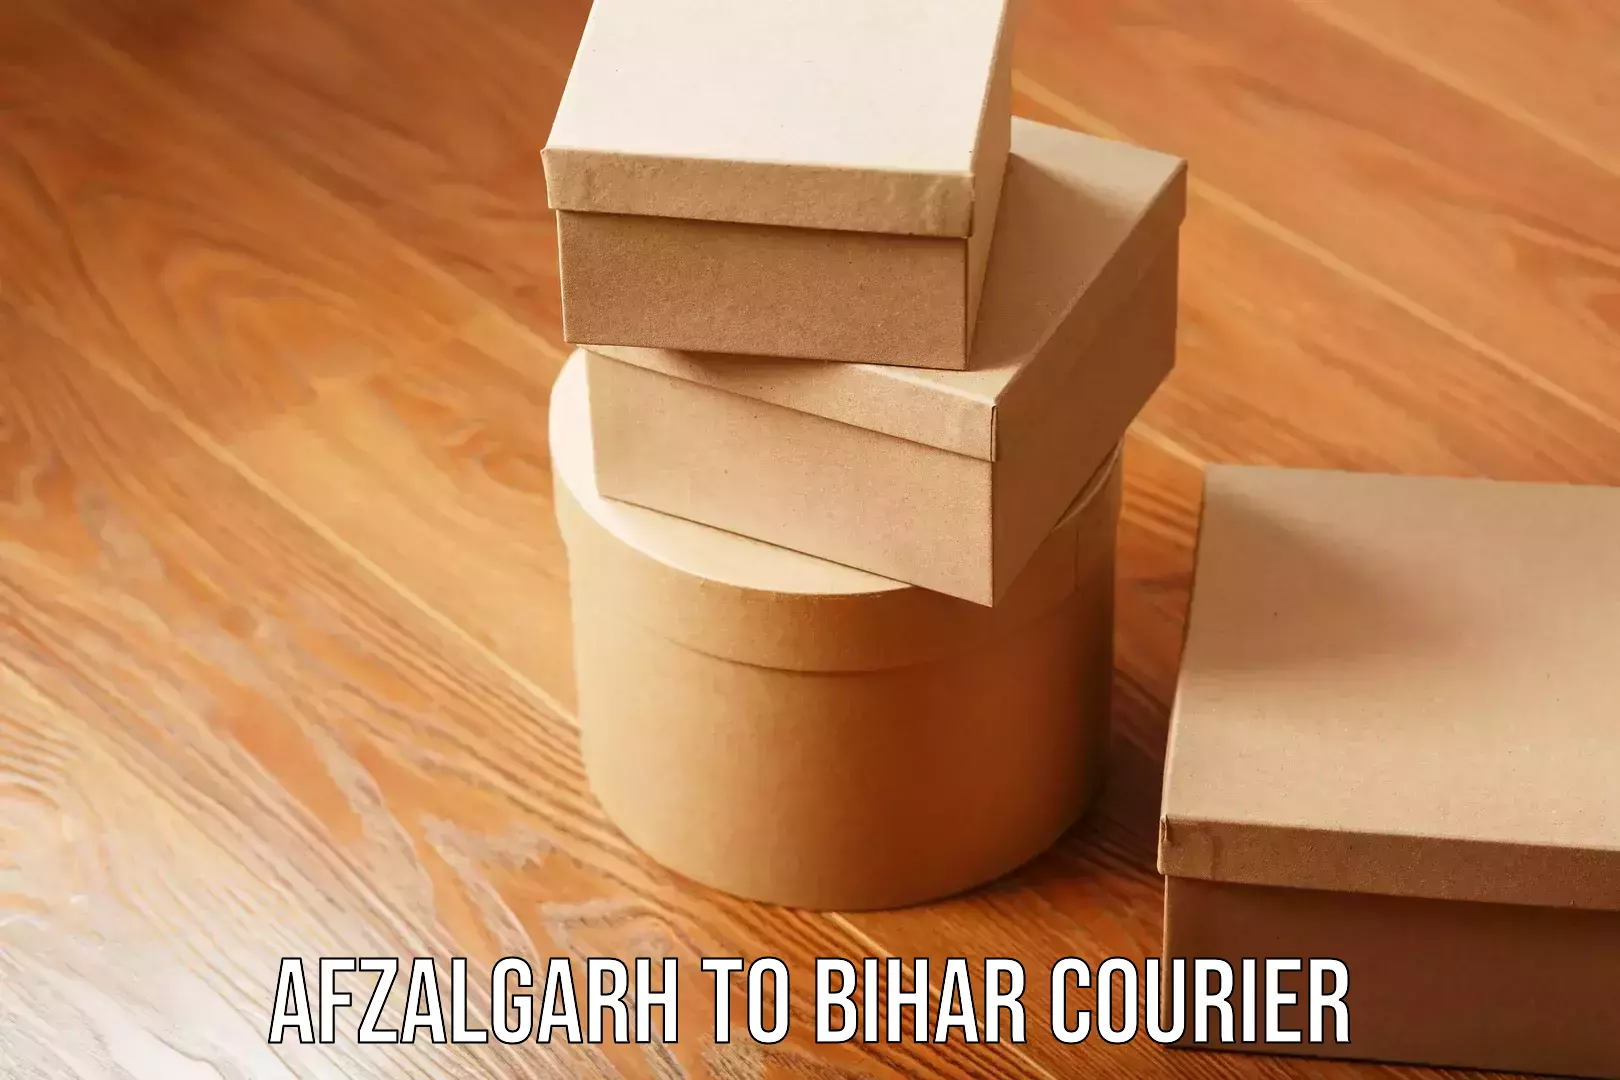 Affordable shipping solutions Afzalgarh to Bihar